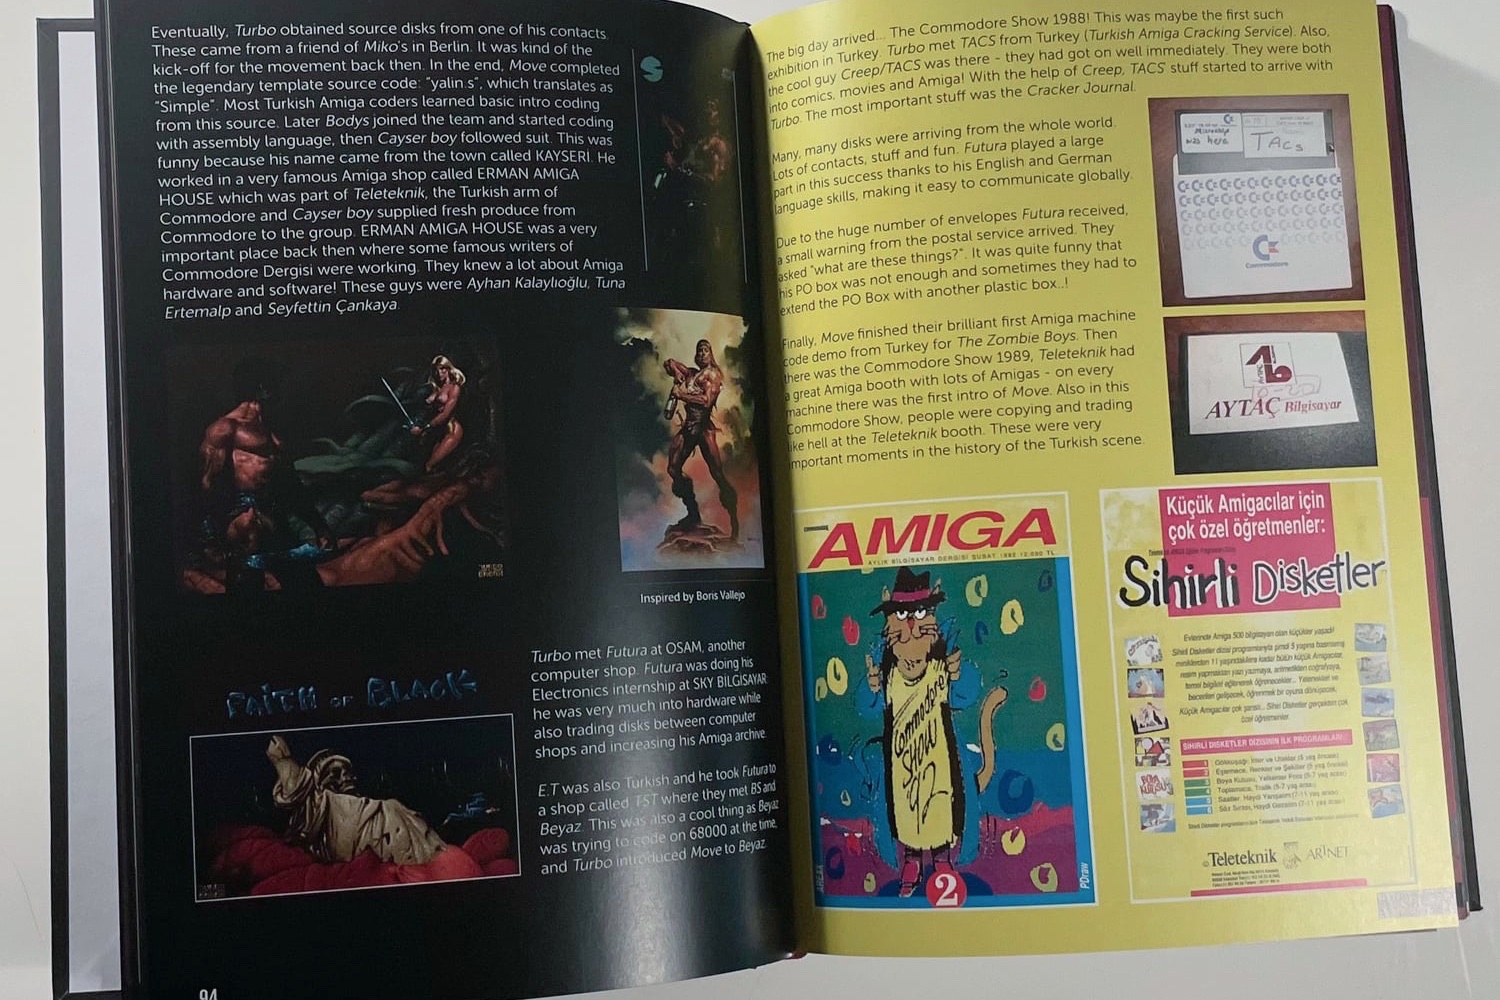 Inner view of the second Amiga Demoscene book